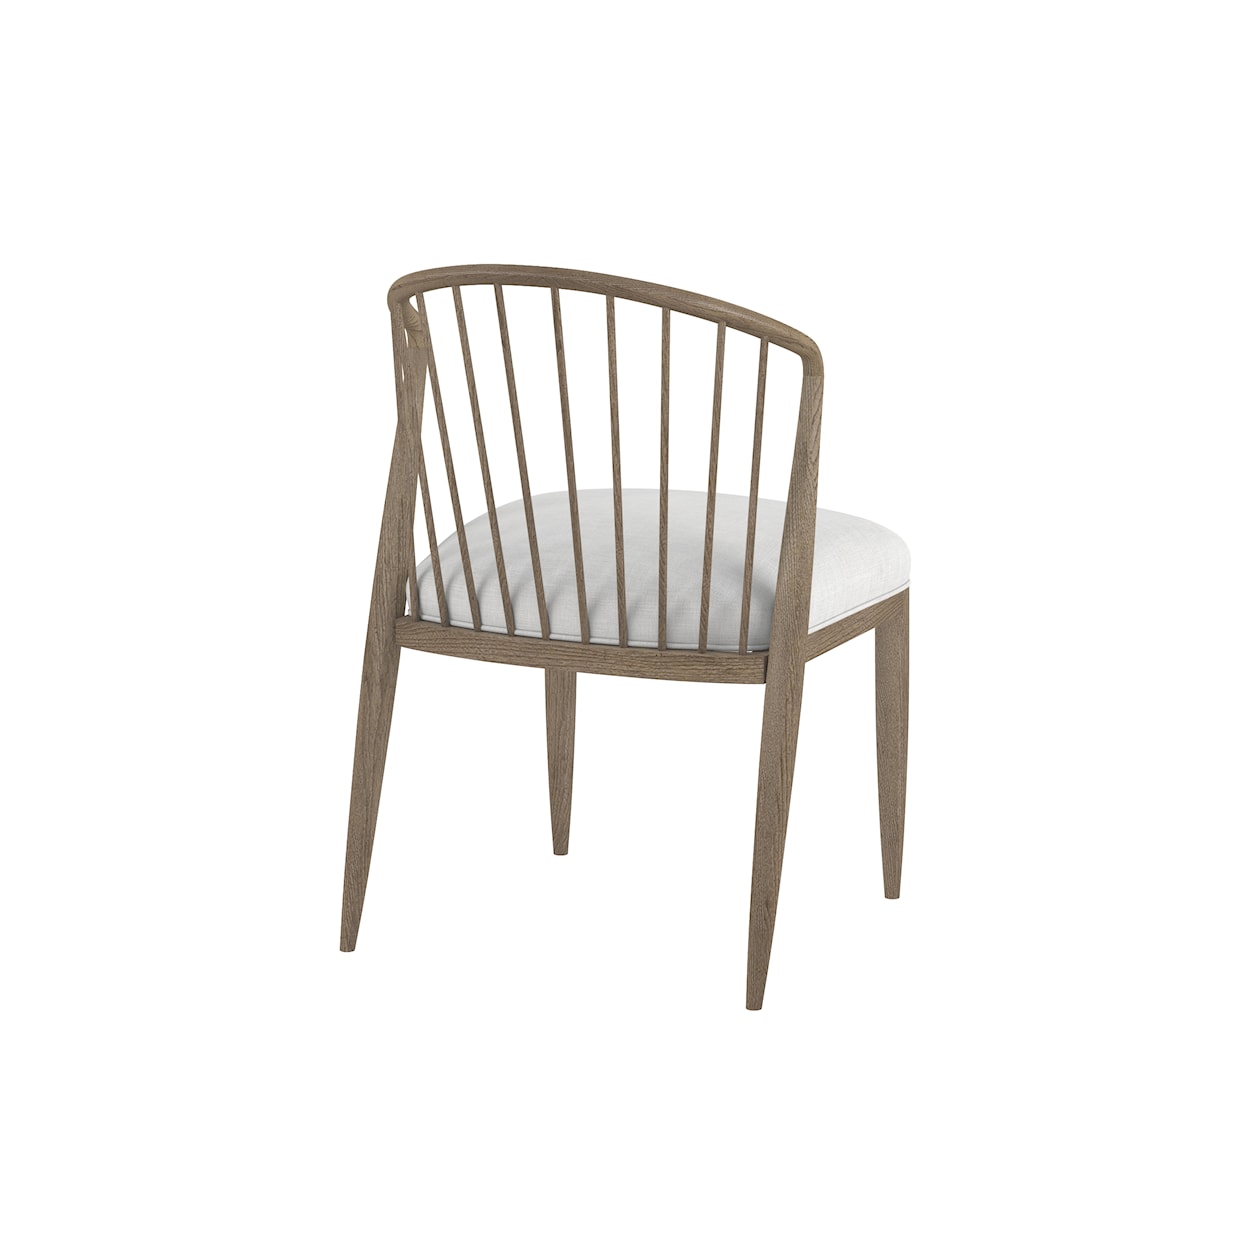 A.R.T. Furniture Inc Finn Spindle Back Dining Chair